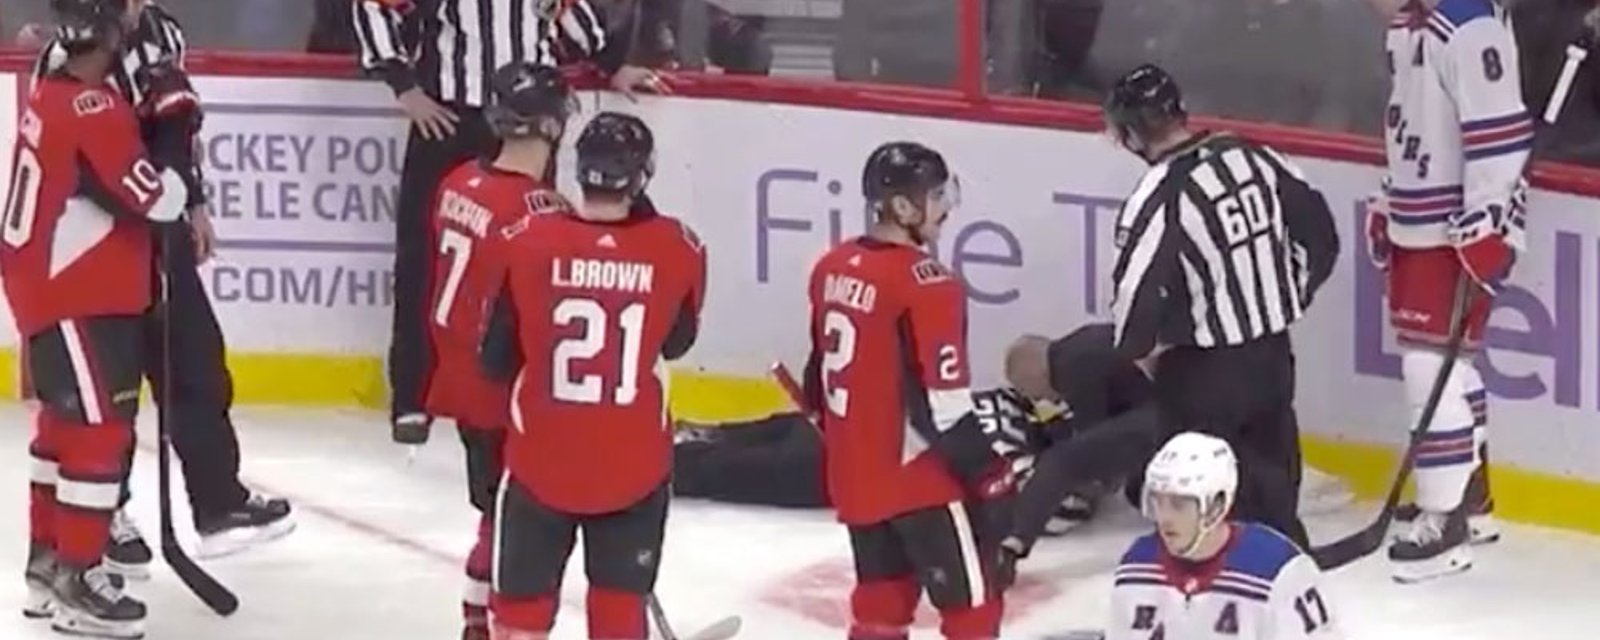 Referee falls on the ice after getting puck to the head